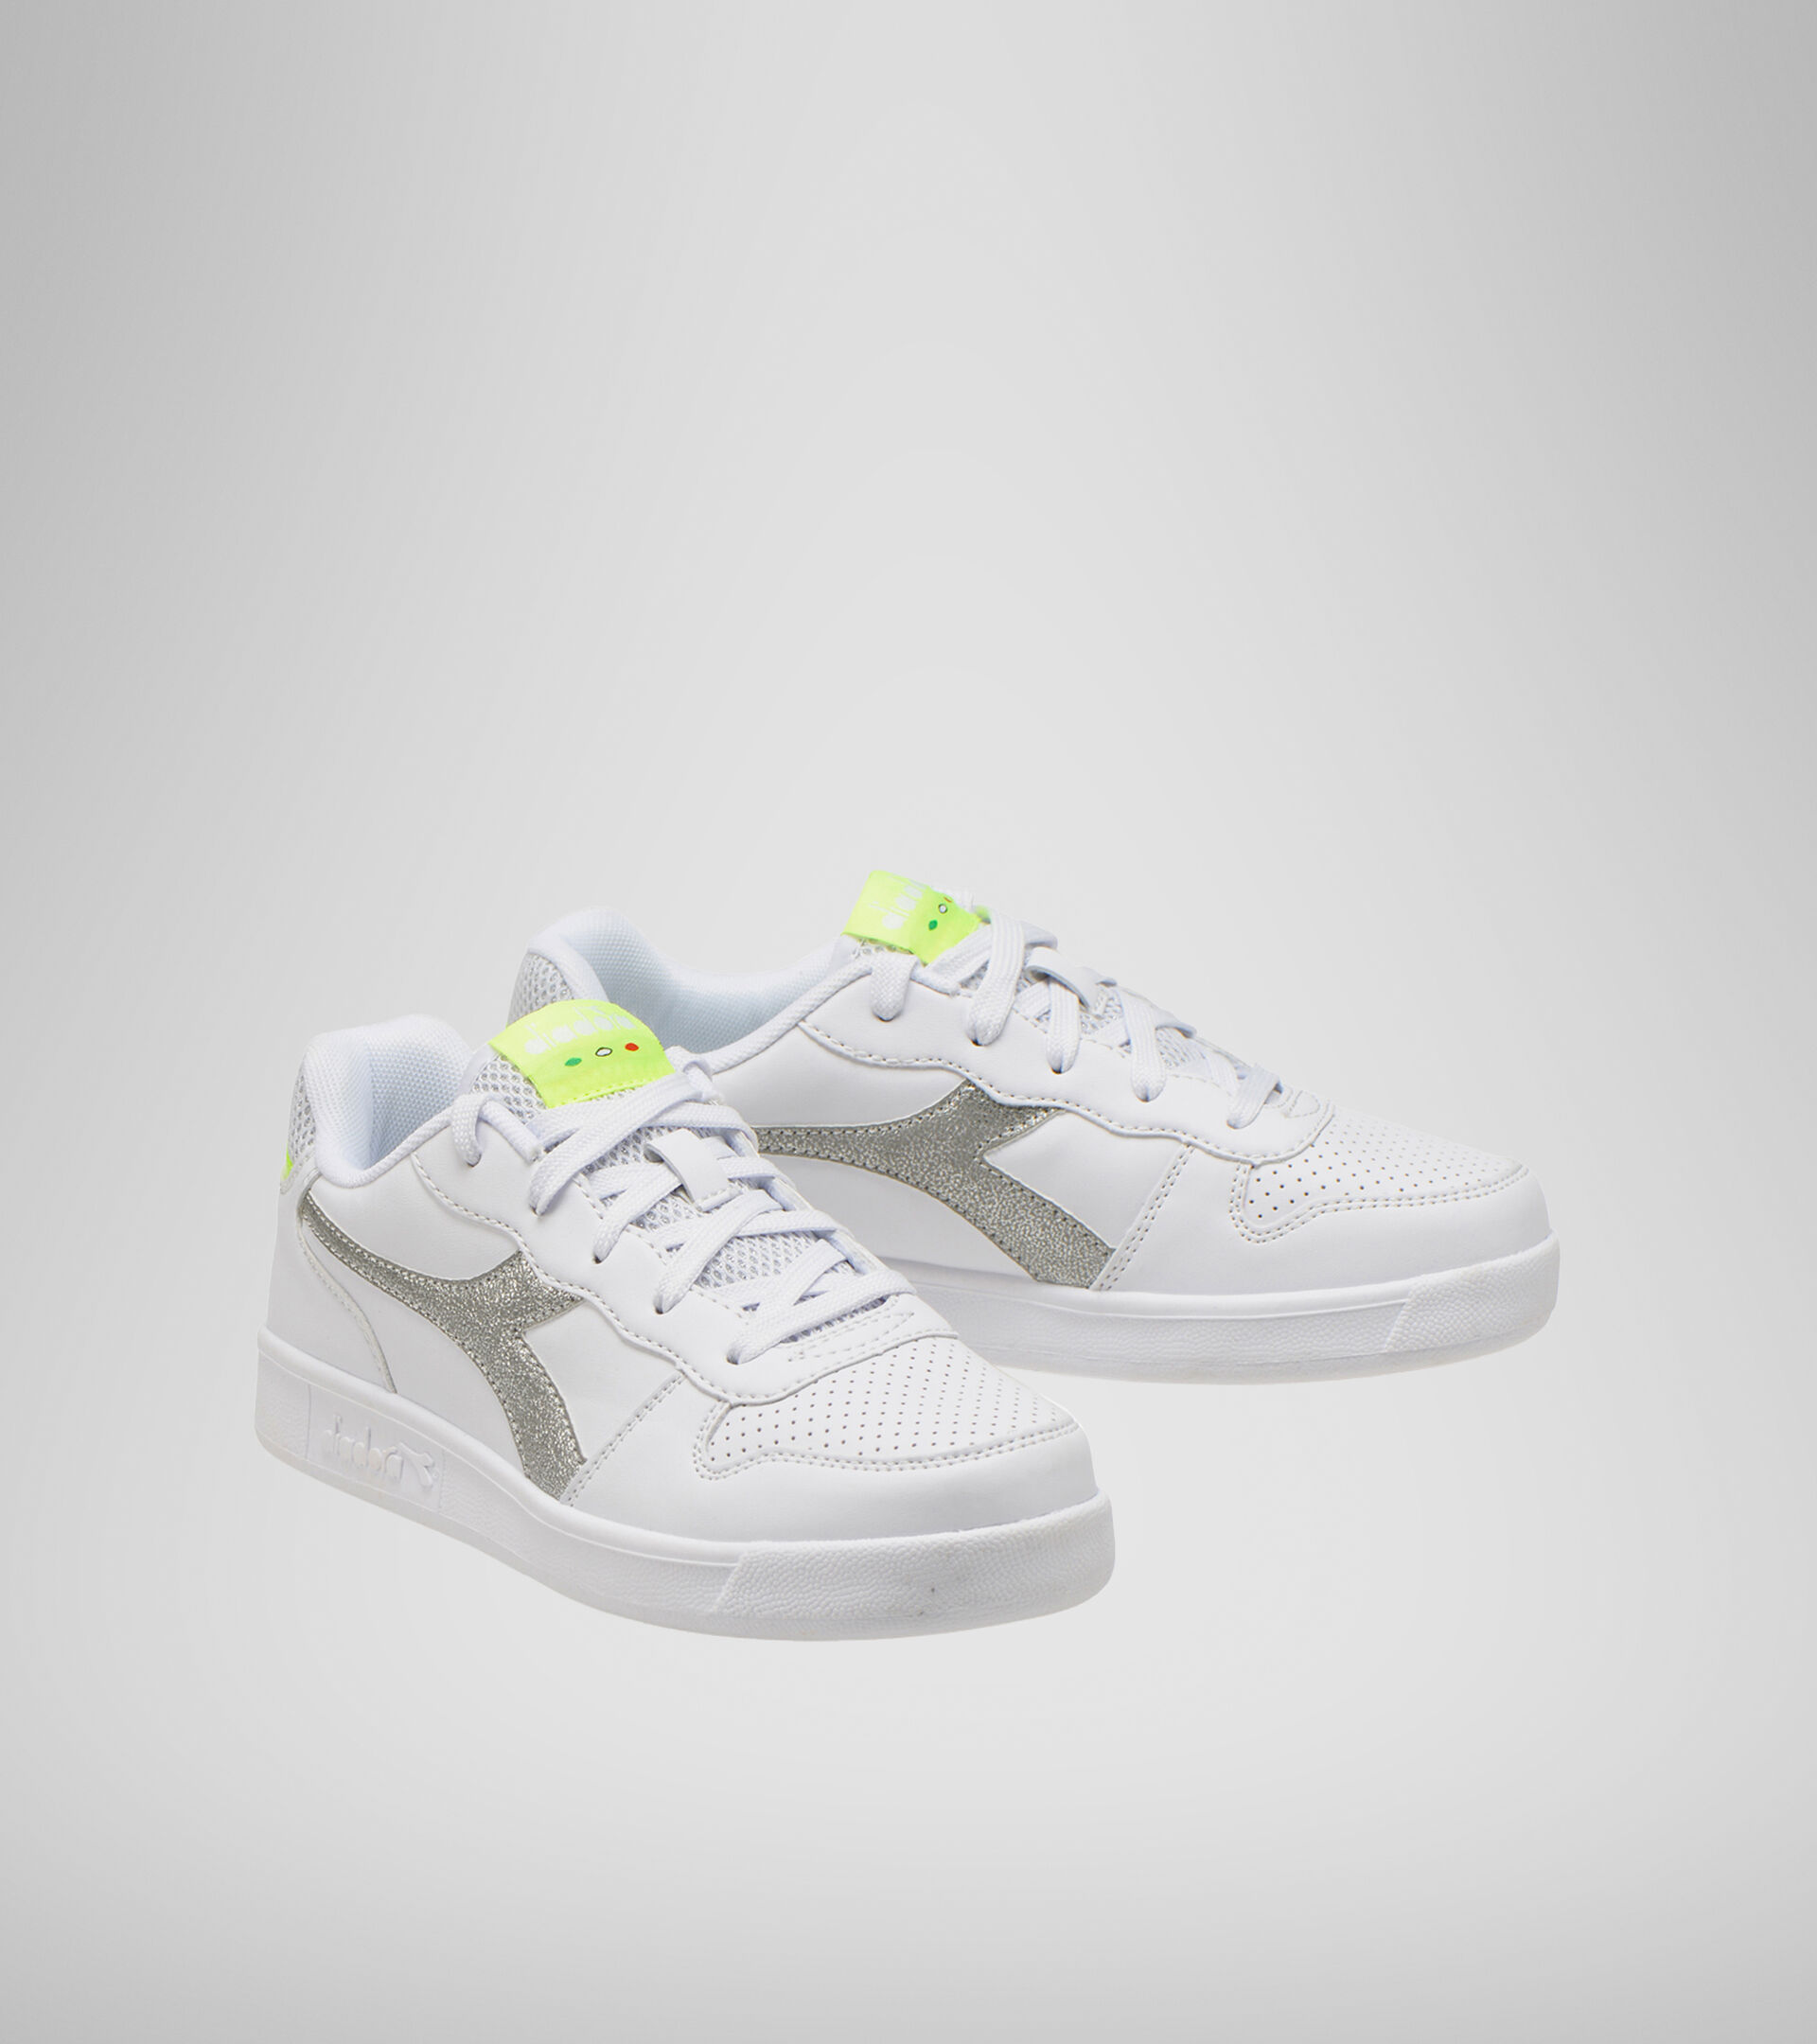 Sports shoes - Youth 8-16 years PLAYGROUND GS GIRL WHITE/YELLOW FLUO. - Diadora